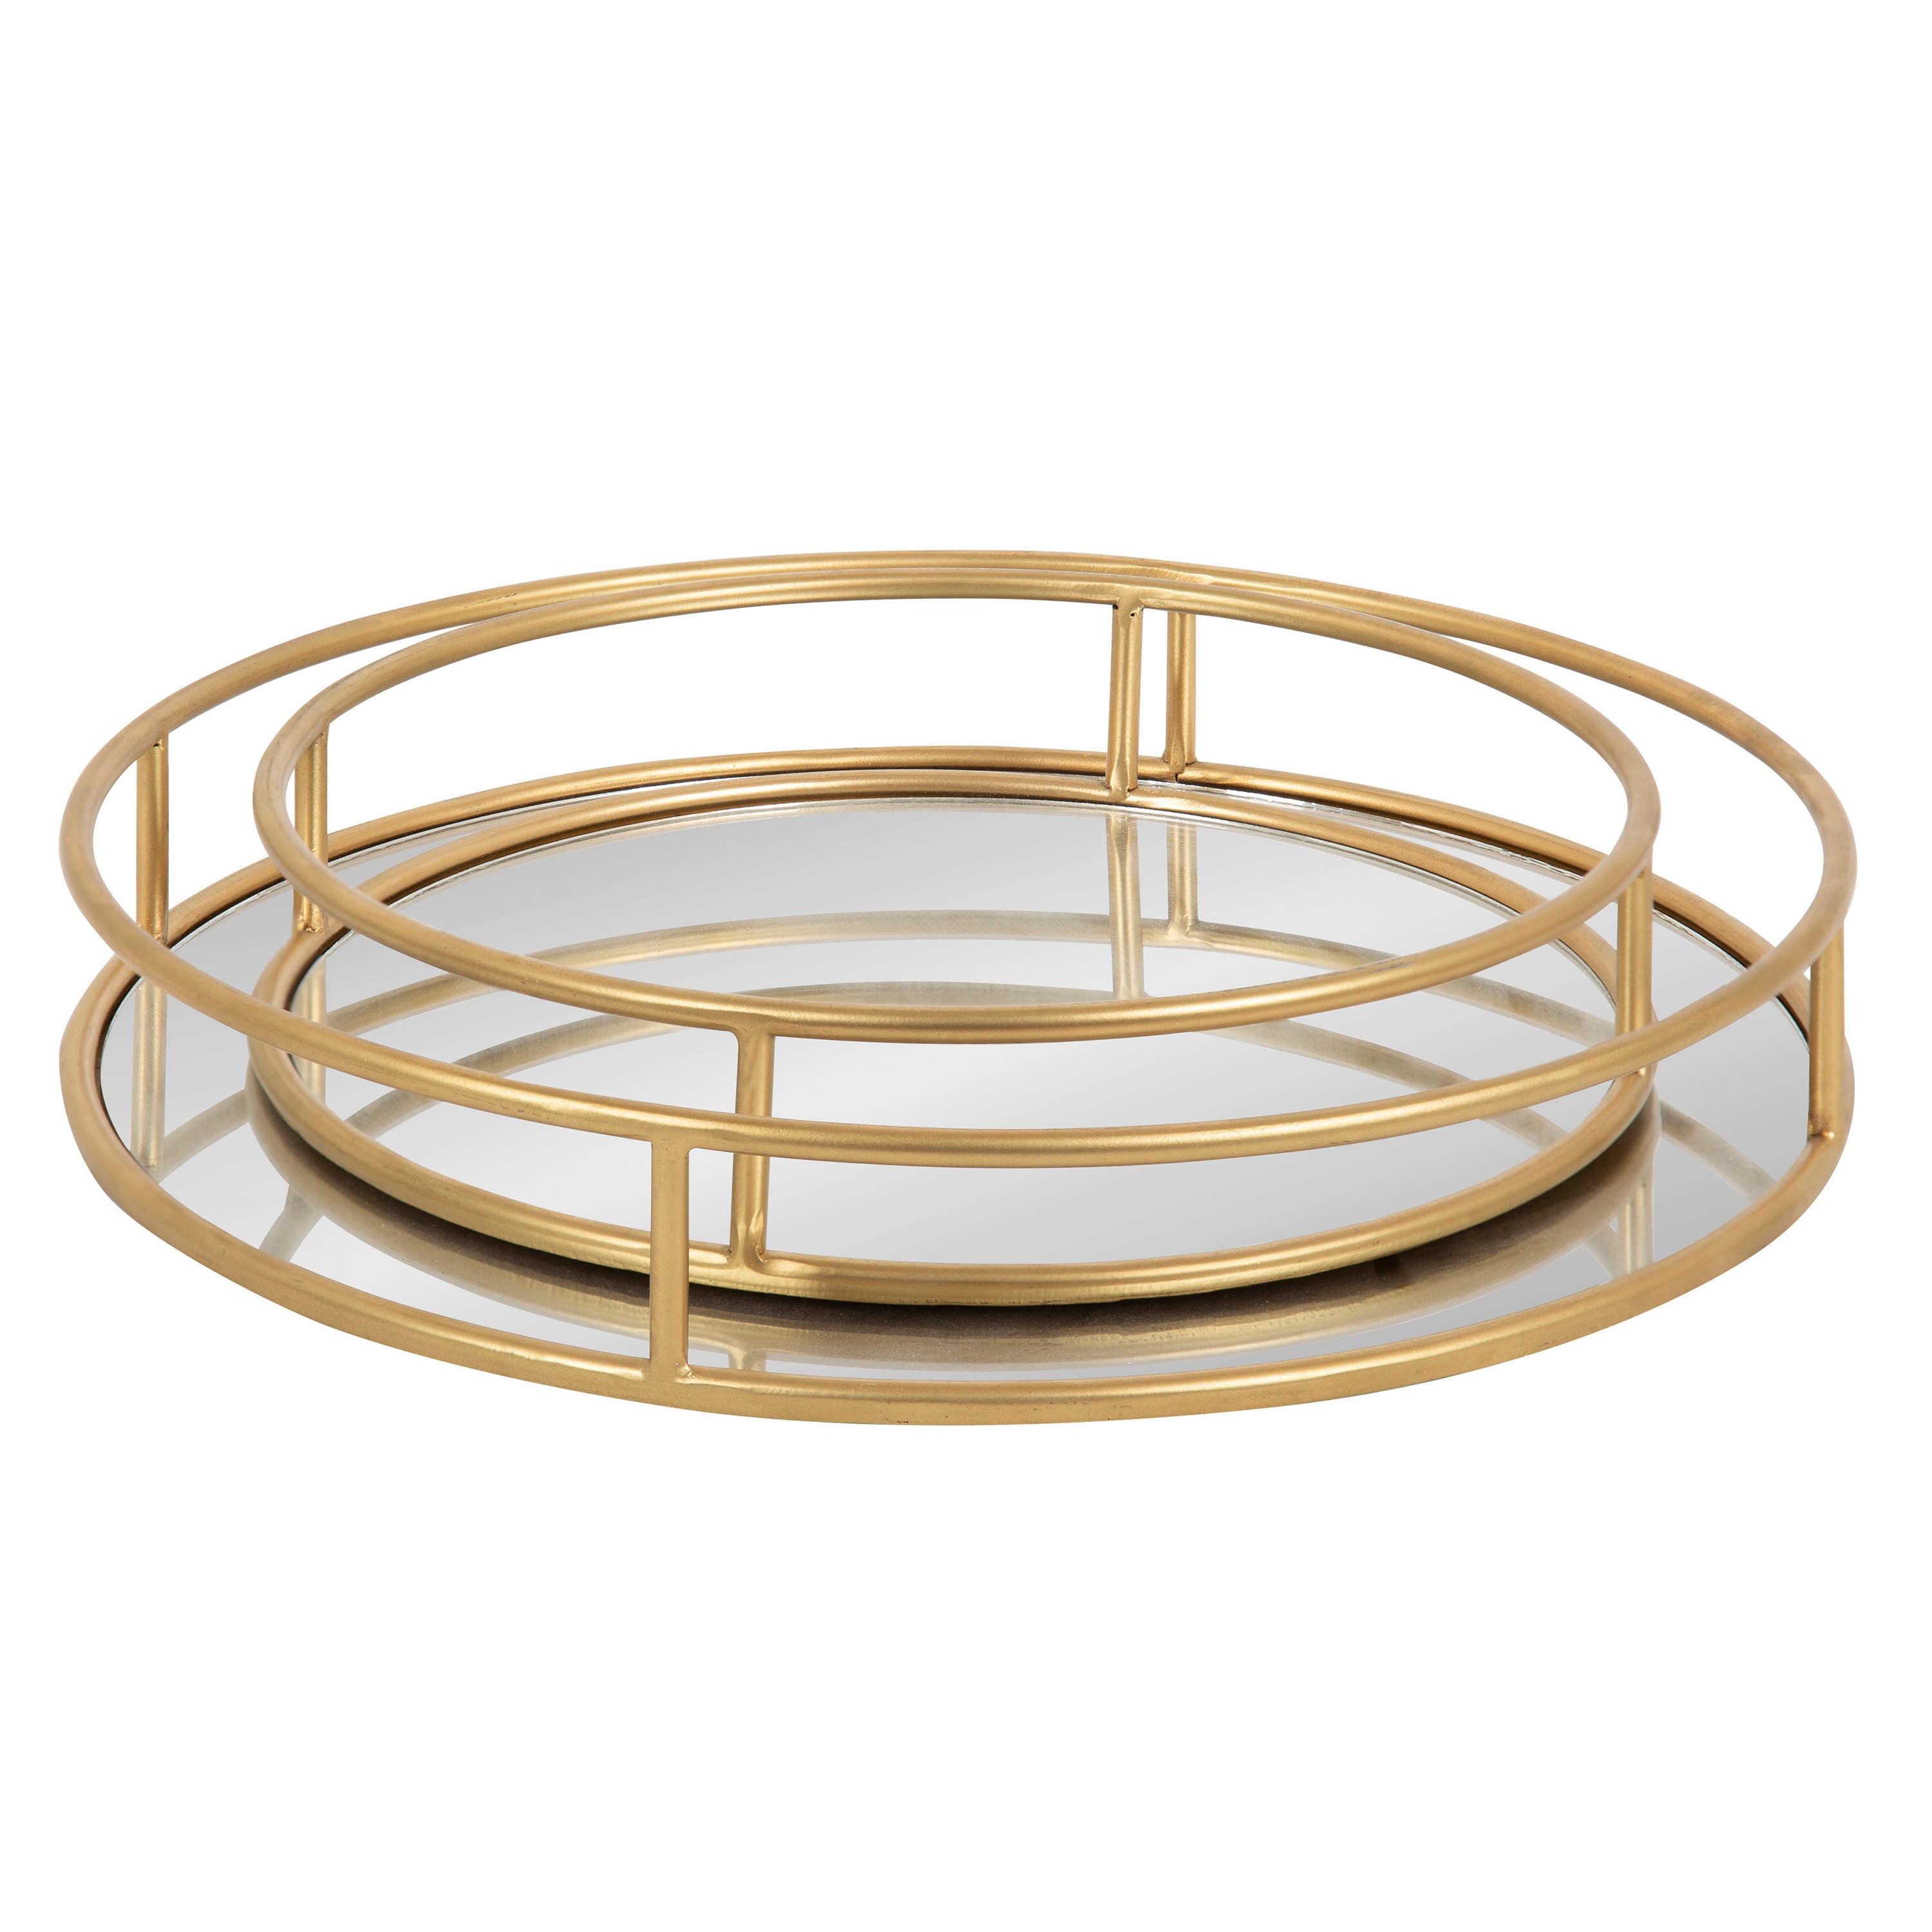 Kate and Laurel 2.2-in x 14-in Gold Serving Tray at Lowes.com